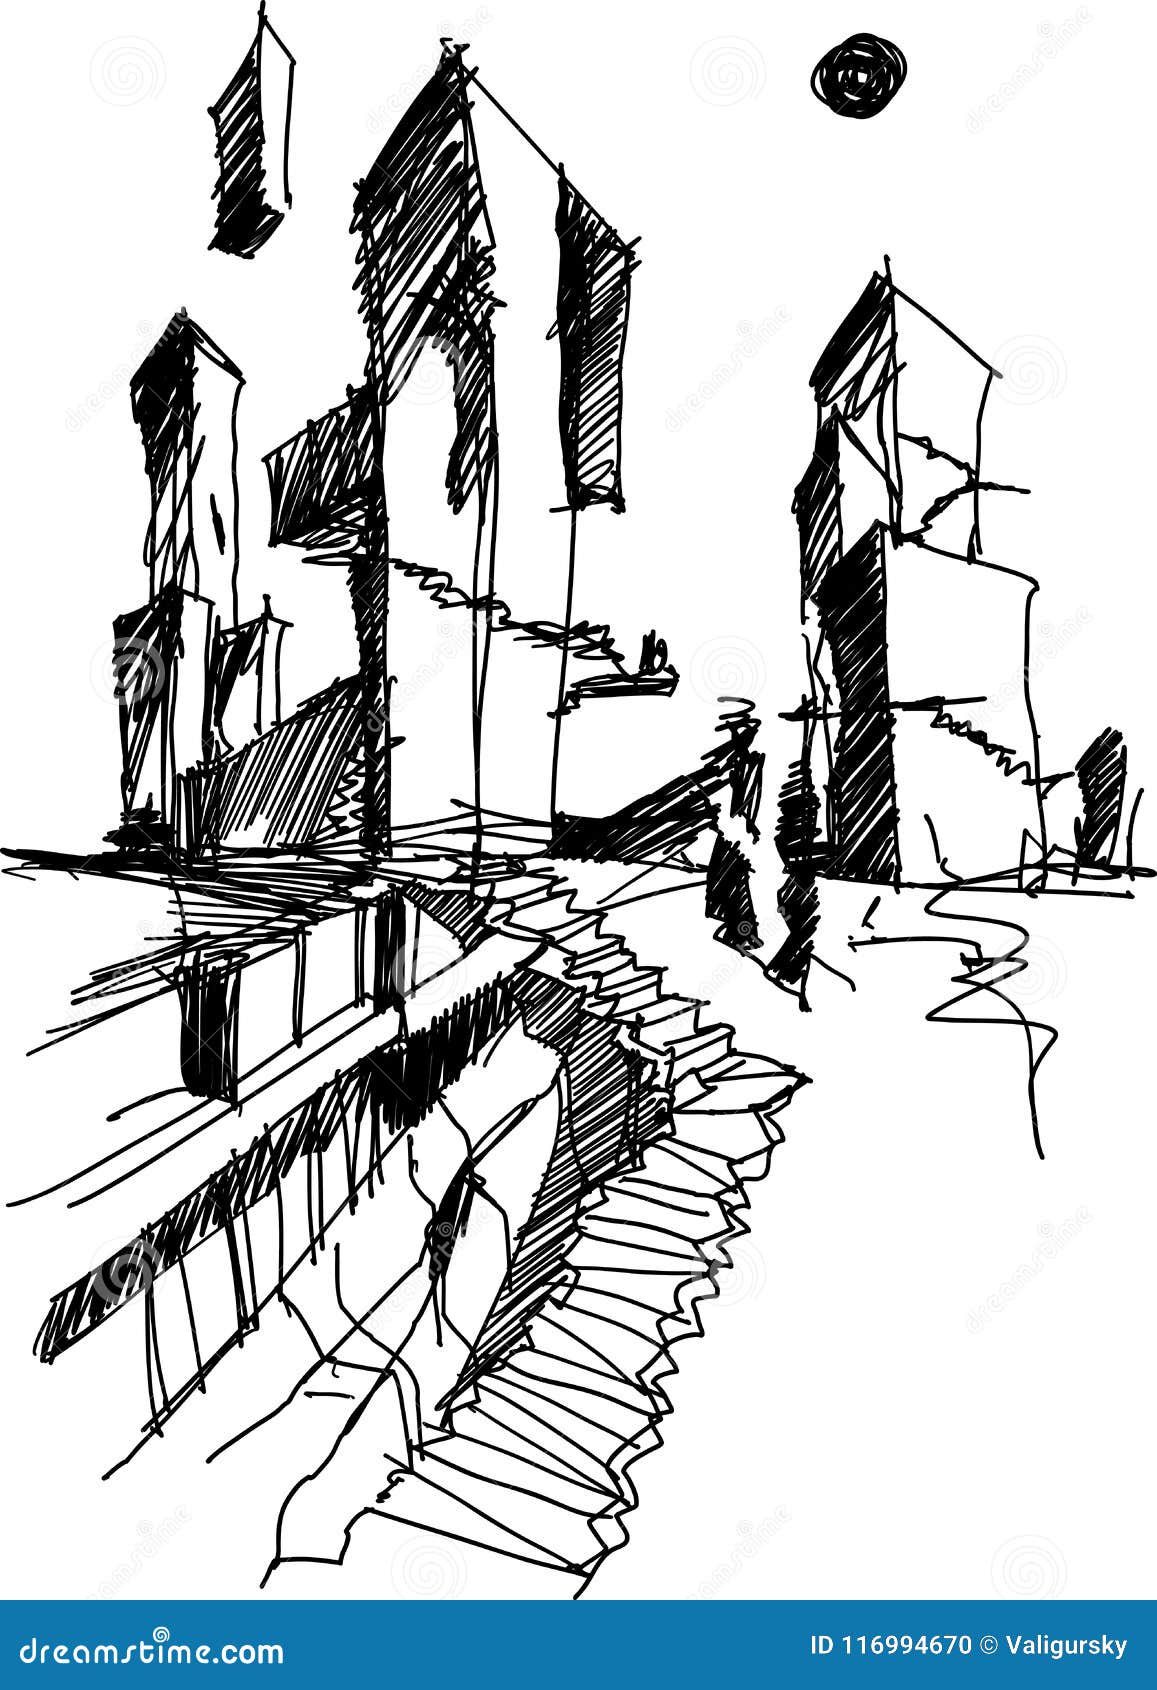 Abstract architecture as continuous lines drawing Vector Image